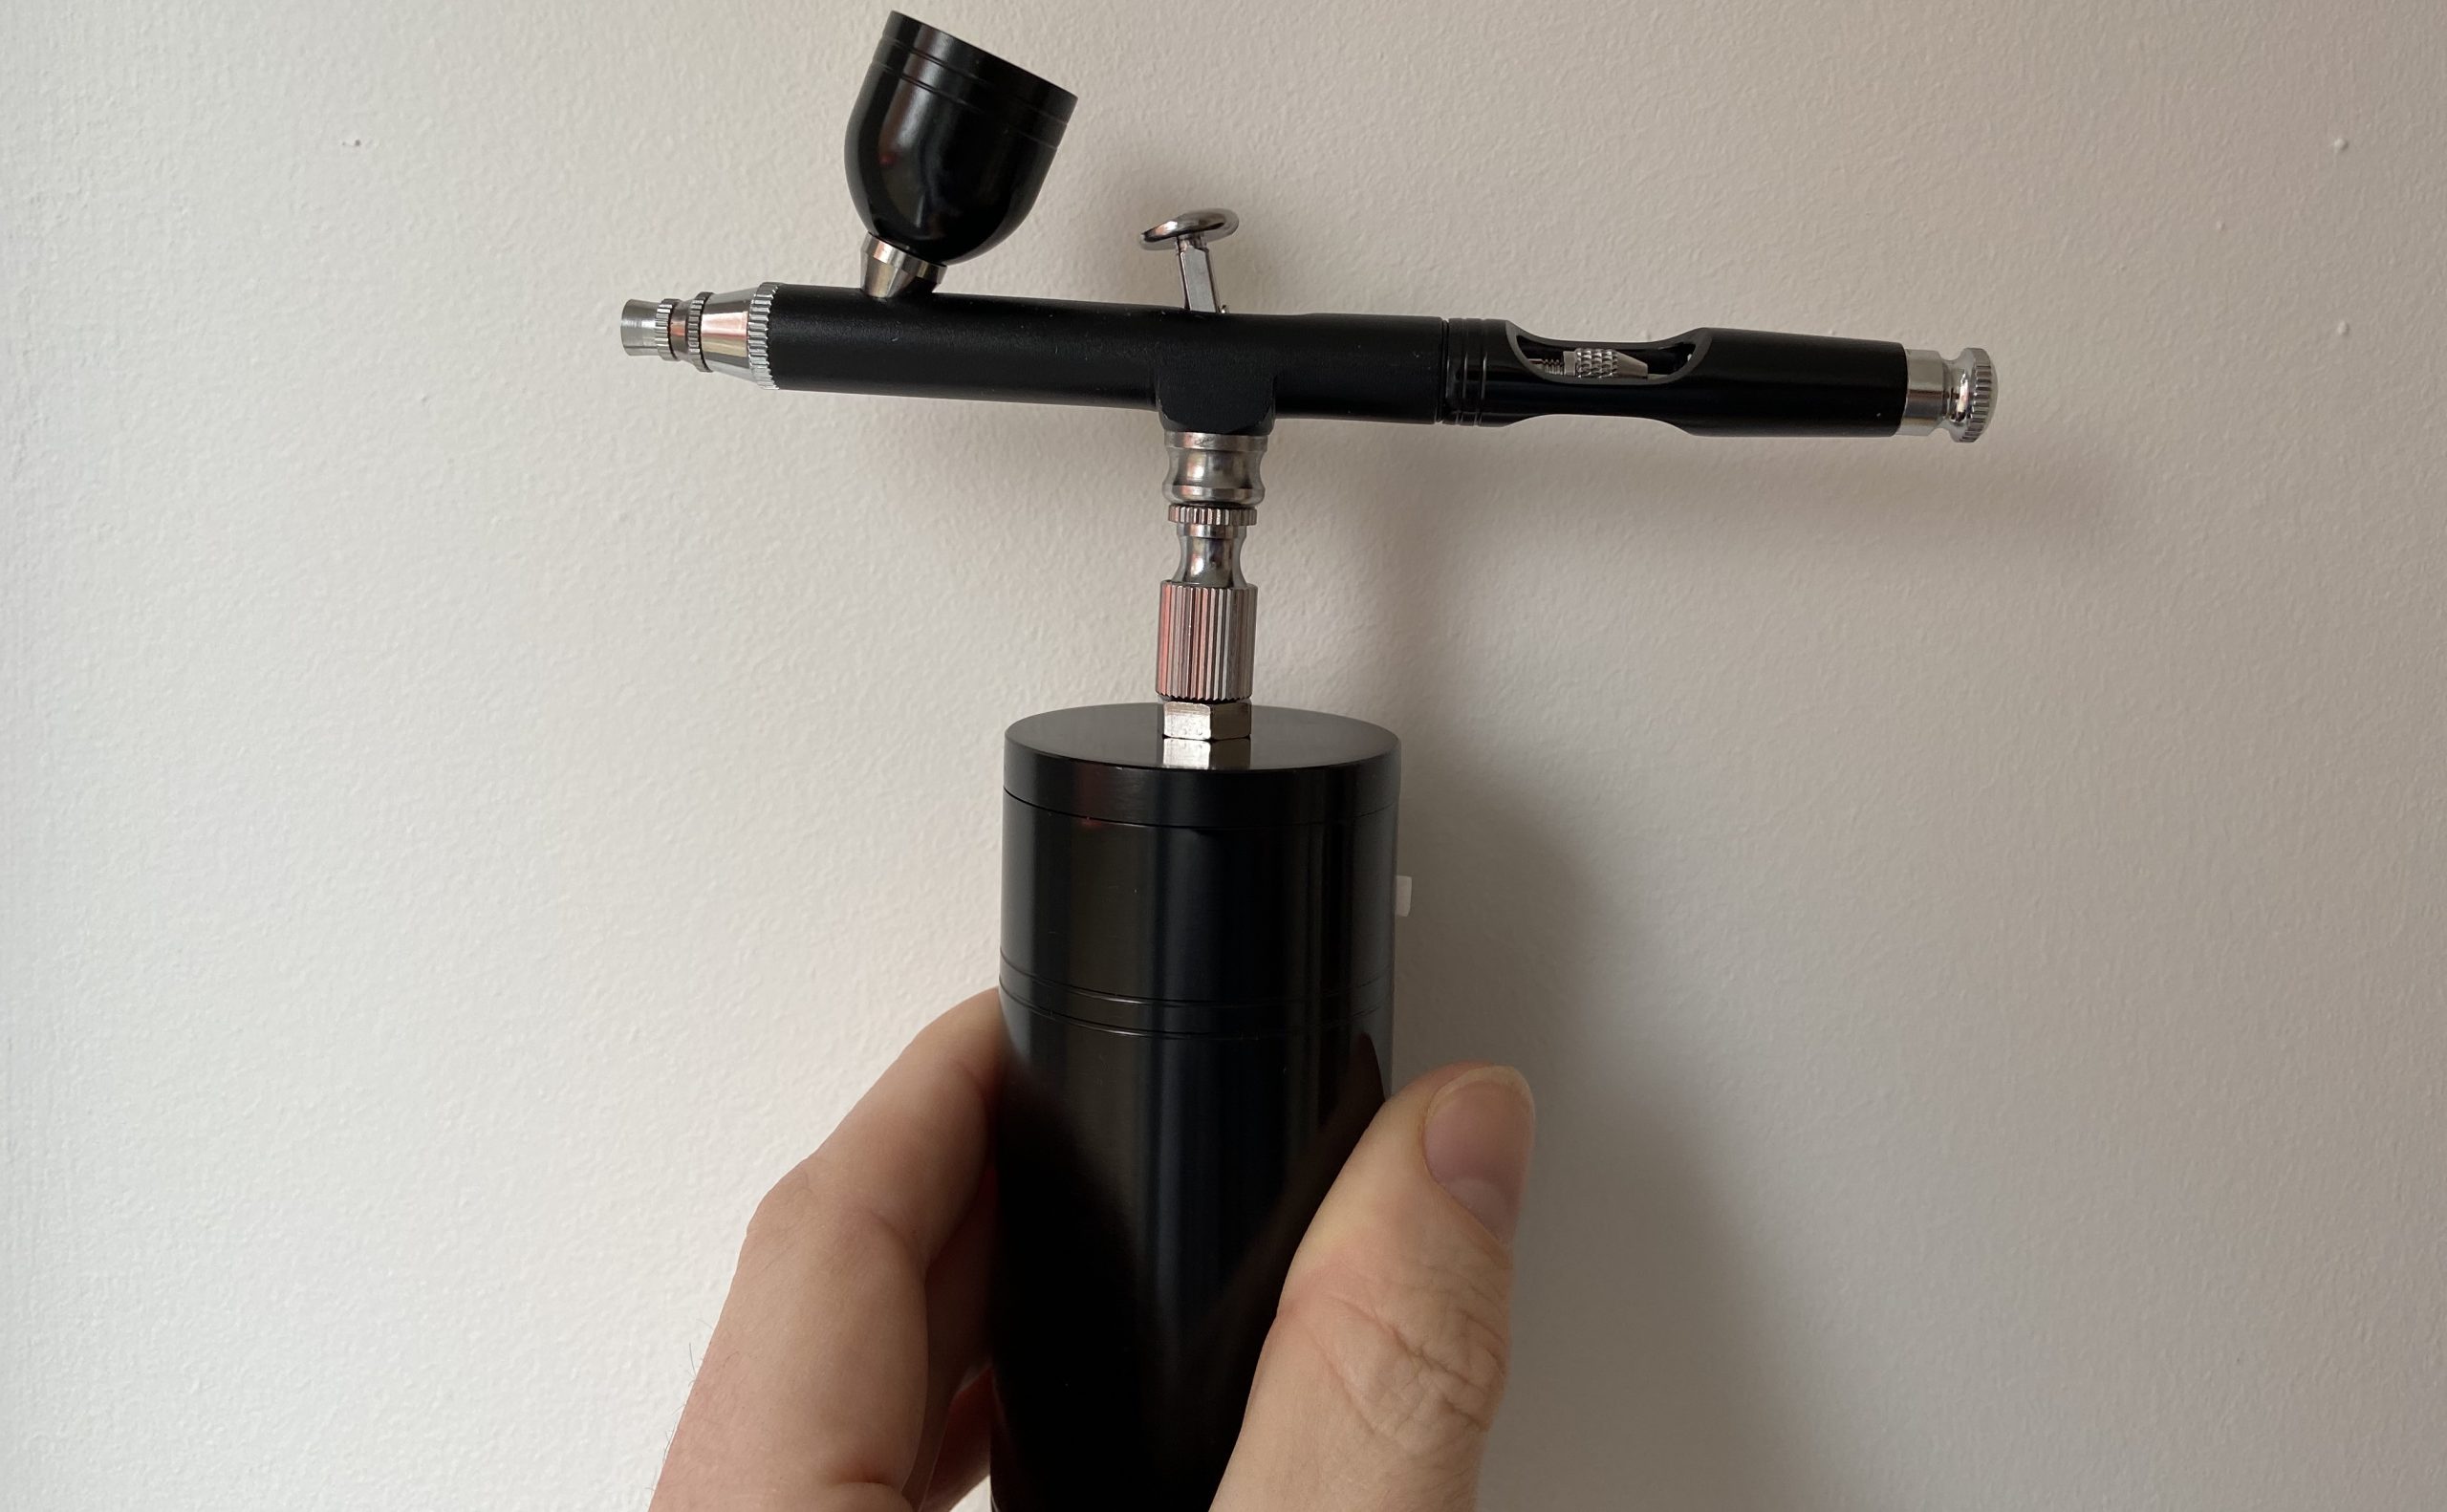 Mini Airbrush With Compact Compressor - Hobbyist Edition – Neat and Handy